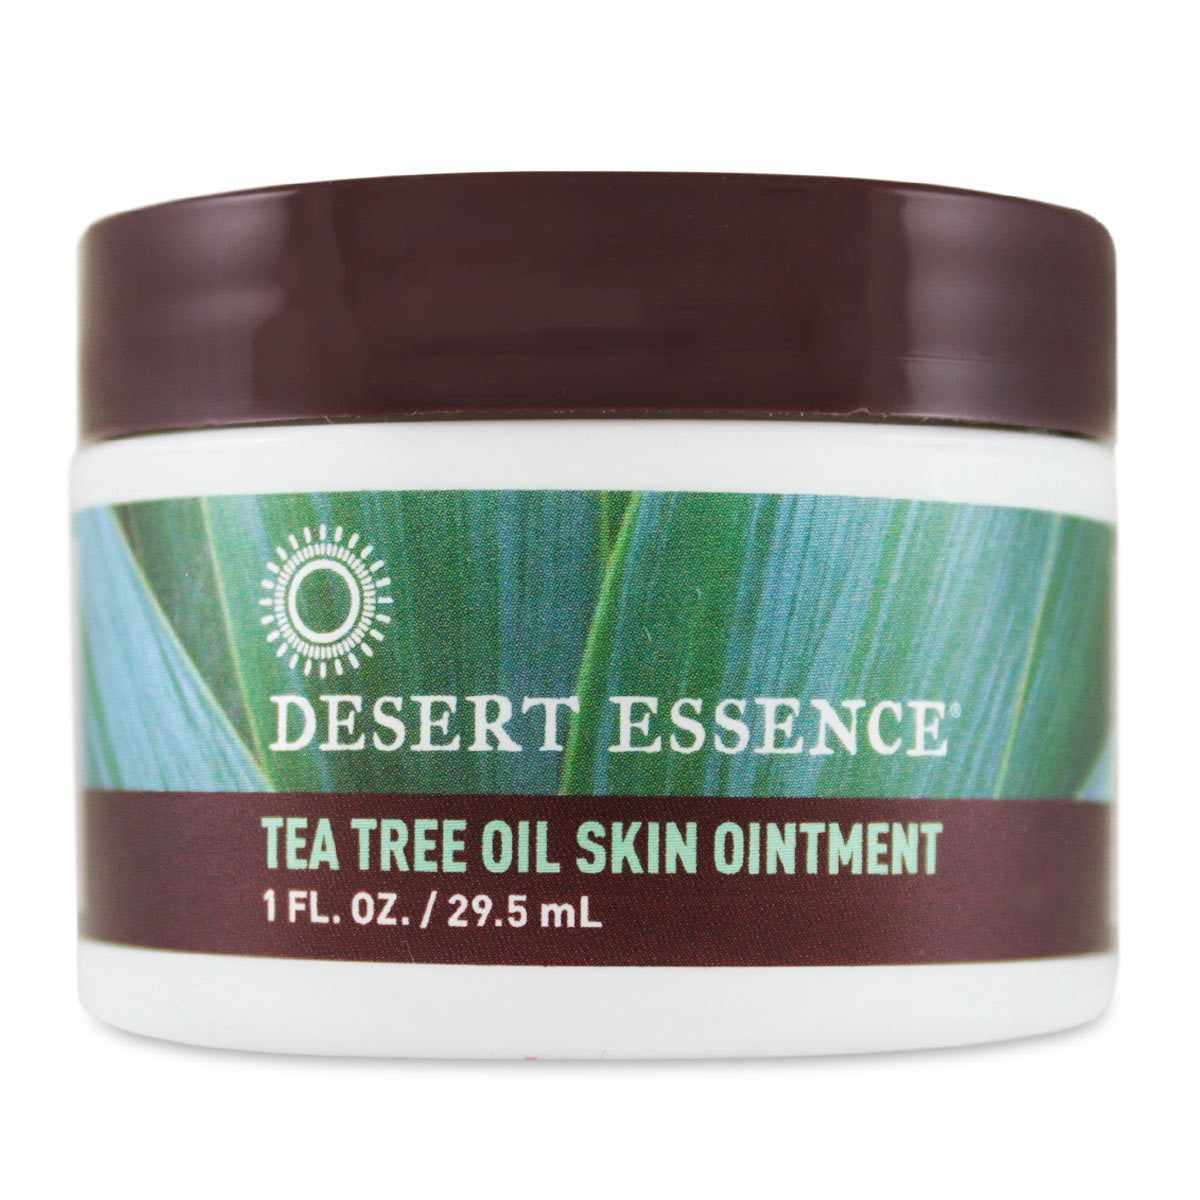 Primary image of Tea Tree Oil Skin Ointment